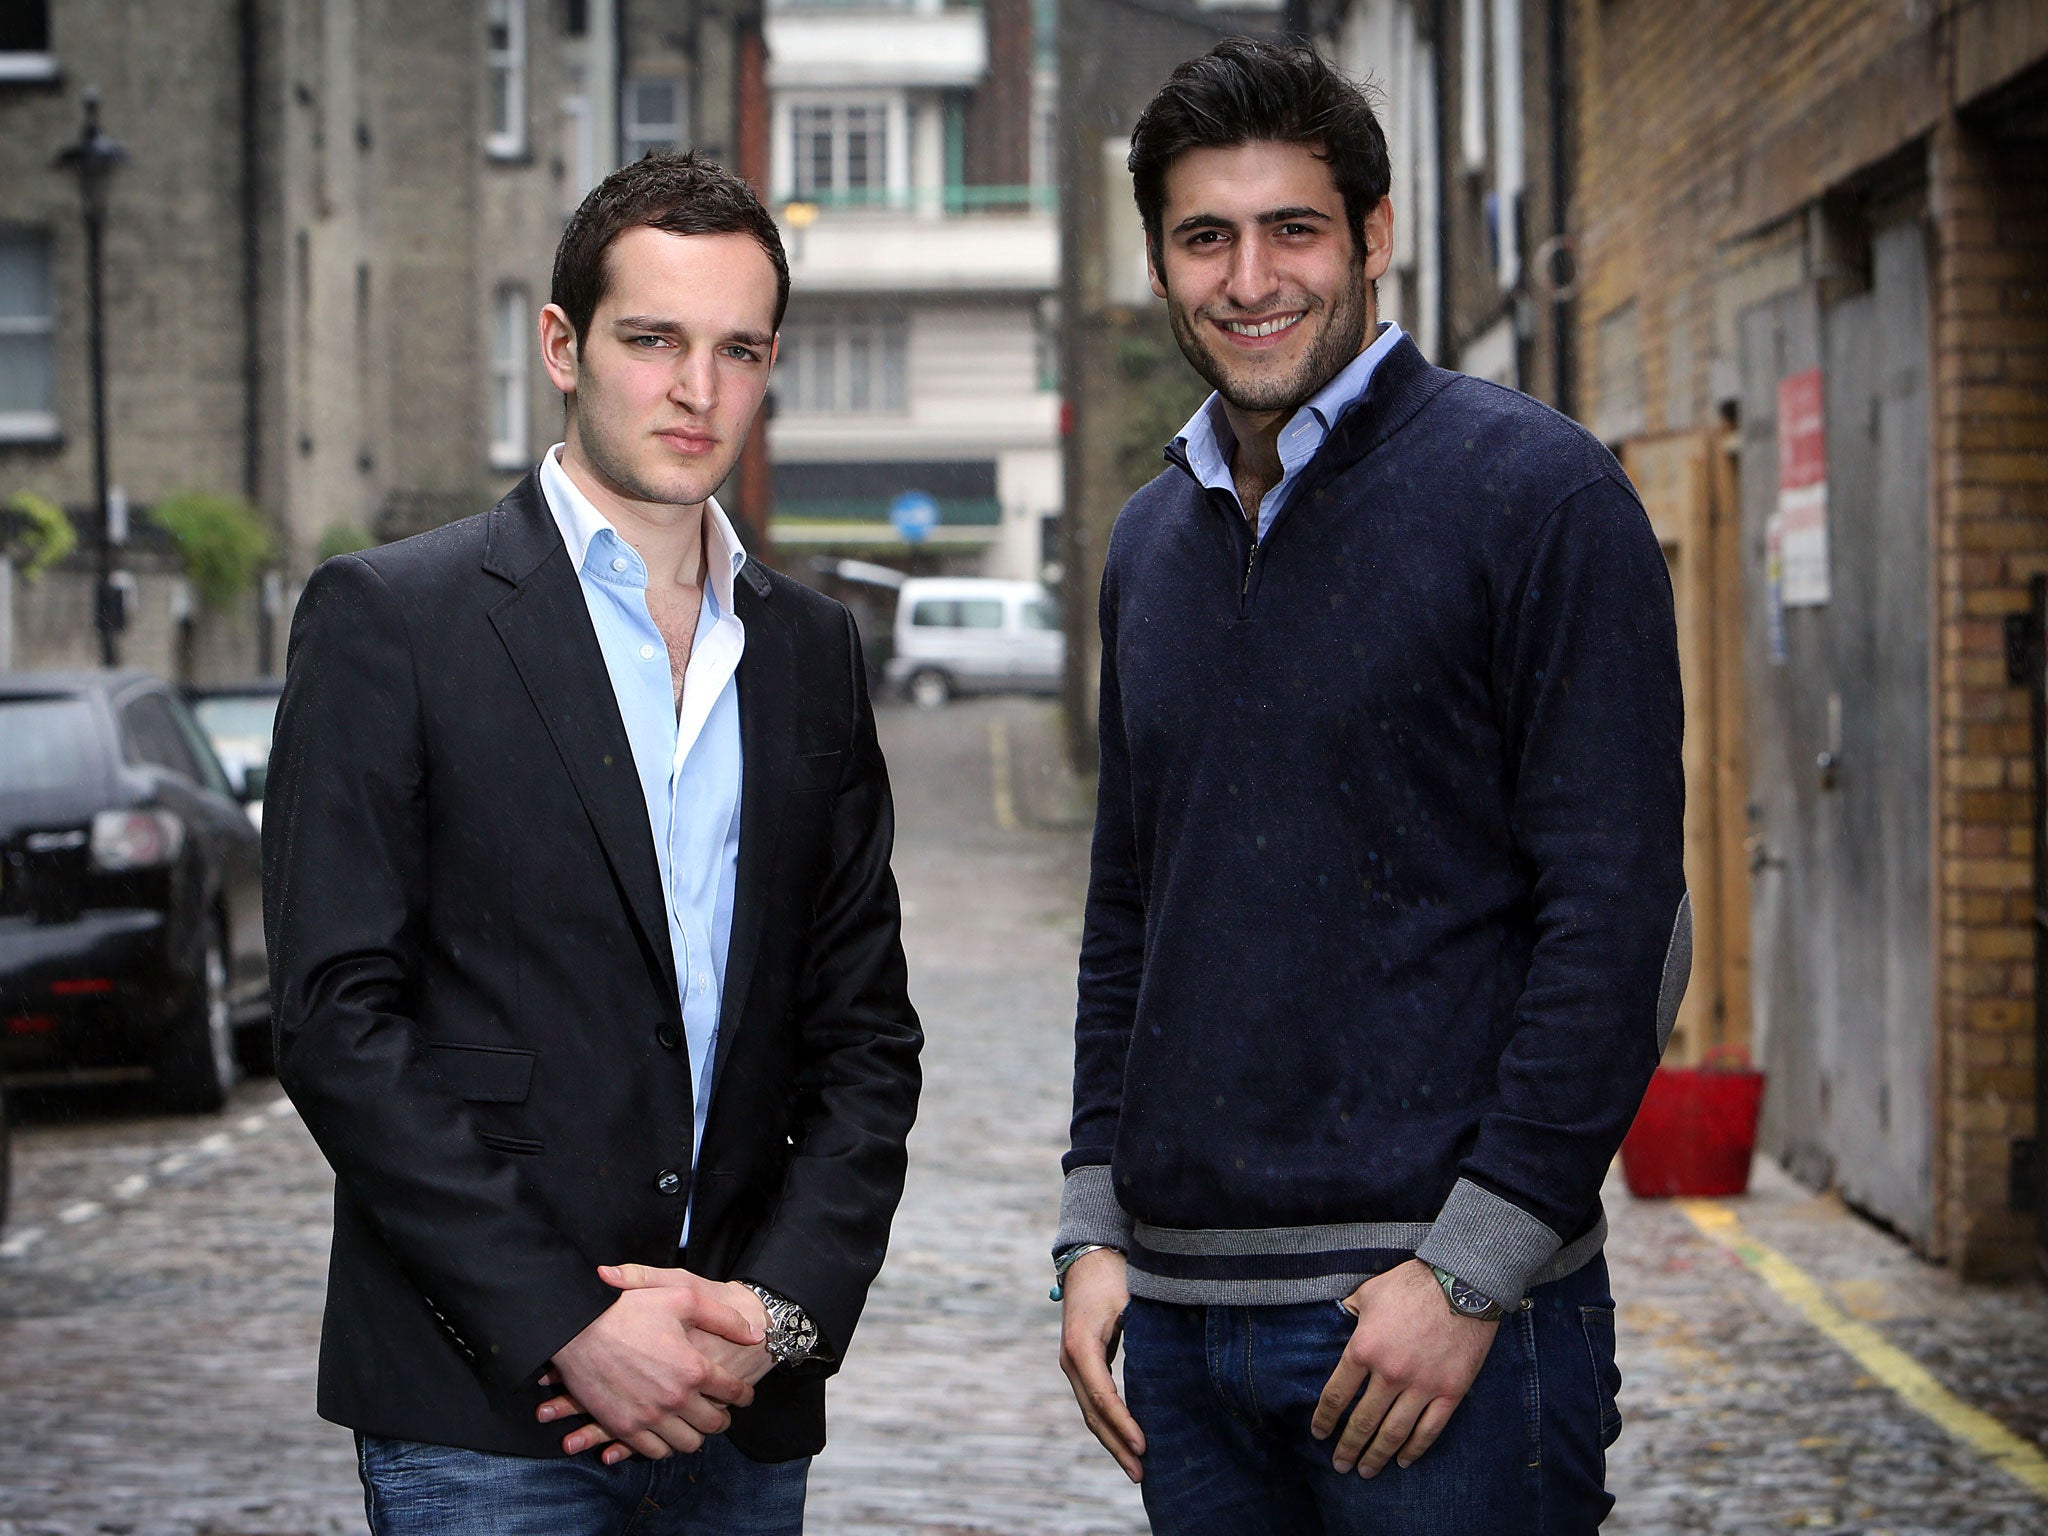 Five years on, Marcus Ereira, left, and Luke Shelley, right, have a flourishing business